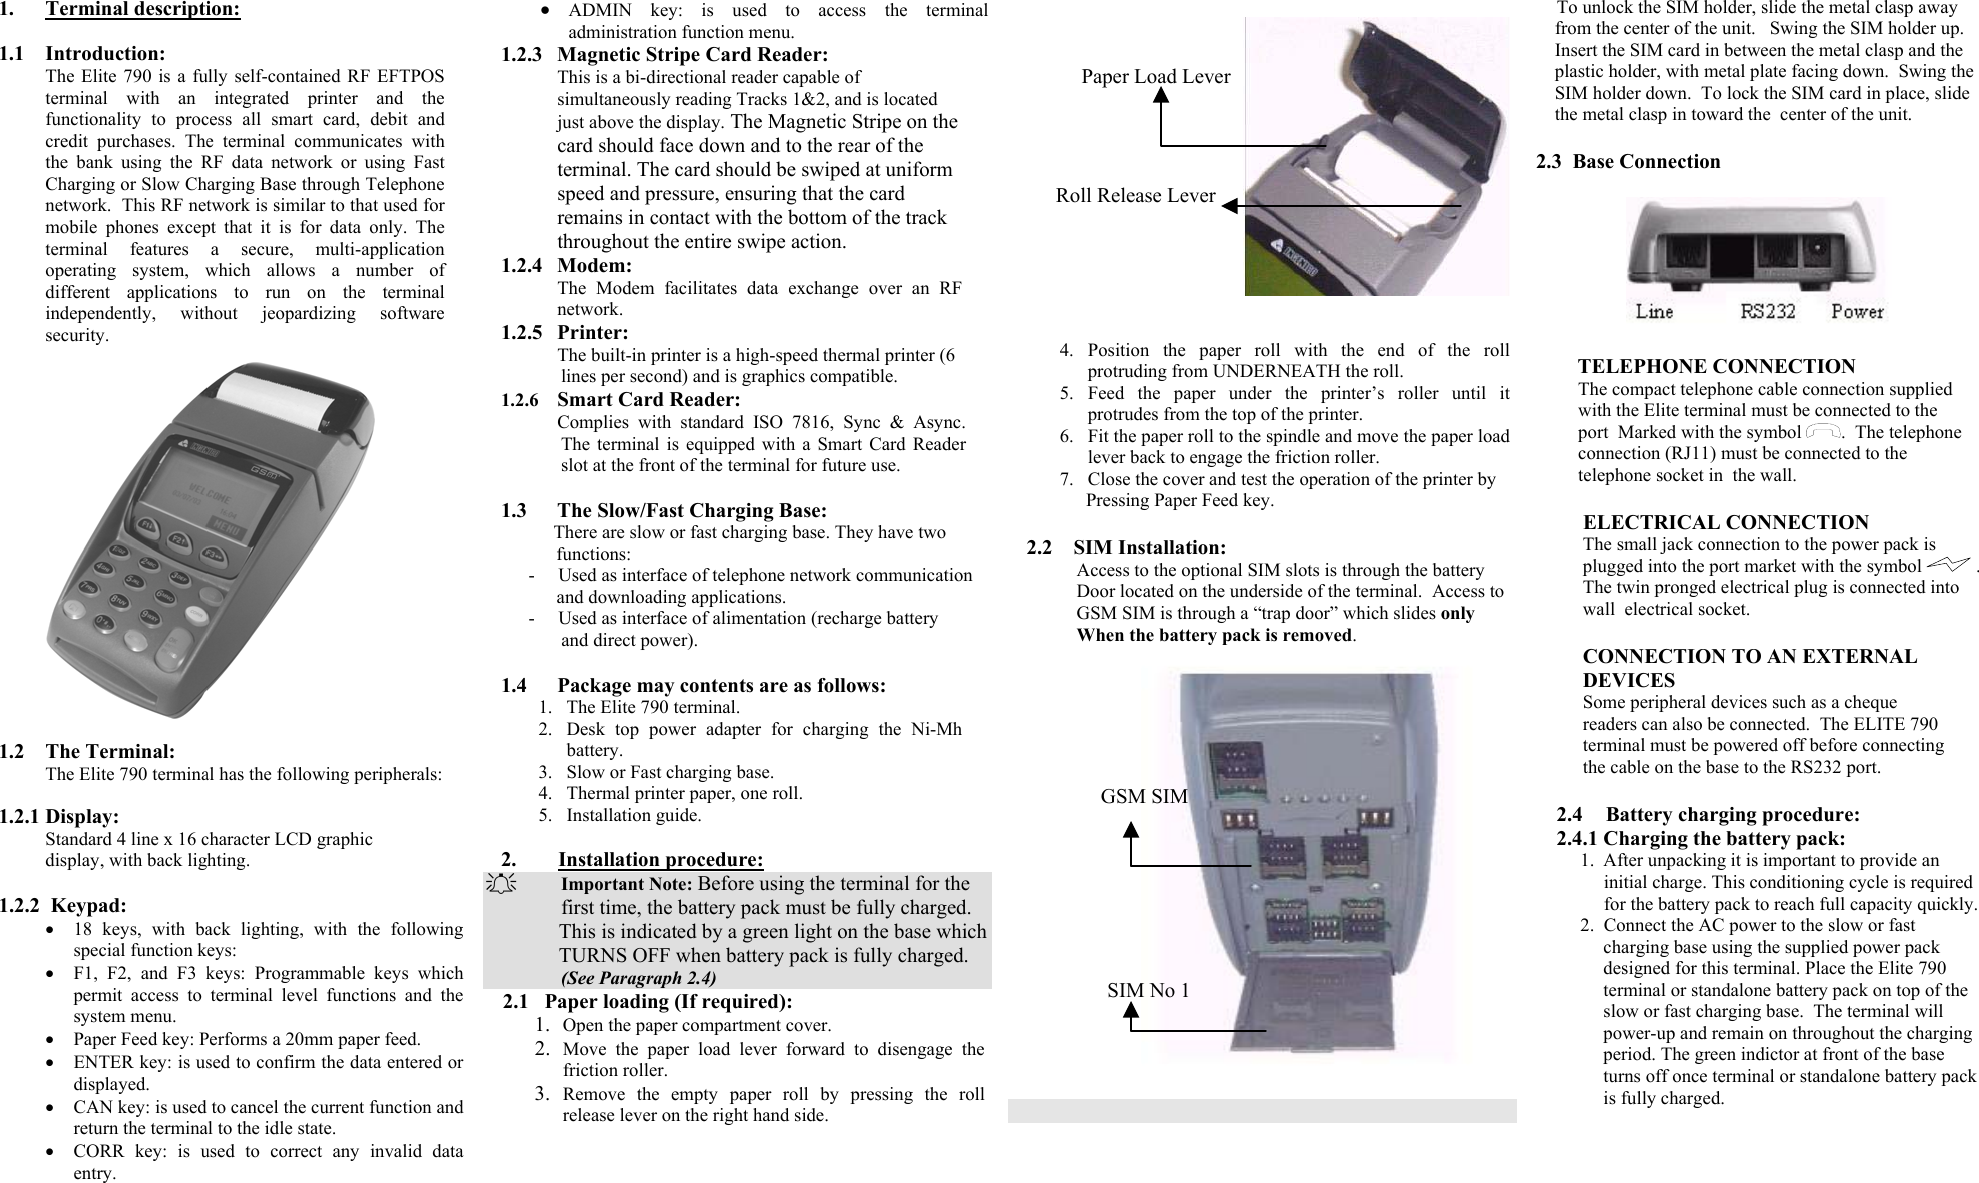 1. Terminal description:  1.1 Introduction: The Elite 790 is a fully self-contained RF EFTPOS terminal with an integrated printer and the functionality to process all smart card, debit and credit purchases. The terminal communicates with the bank using the RF data network or using Fast Charging or Slow Charging Base through Telephone network.  This RF network is similar to that used for mobile phones except that it is for data only. The terminal features a secure, multi-application operating system, which allows a number of different applications to run on the terminal independently, without jeopardizing software security.  1.2 The Terminal: The Elite 790 terminal has the following peripherals:   1.2.1 Display: Standard 4 line x 16 character LCD graphic display, with back lighting.  1.2.2  Keypad: •  18 keys, with back lighting, with the following special function keys: •  F1, F2, and F3 keys: Programmable keys which permit access to terminal level functions and the system menu. •  Paper Feed key: Performs a 20mm paper feed. •  ENTER key: is used to confirm the data entered or displayed. •  CAN key: is used to cancel the current function and return the terminal to the idle state.  •  CORR key: is used to correct any invalid data entry. •  ADMIN key: is used to access the terminal administration function menu.  1.2.3  Magnetic Stripe Card Reader: This is a bi-directional reader capable of simultaneously reading Tracks 1&amp;2, and is located just above the display. The Magnetic Stripe on the card should face down and to the rear of the terminal. The card should be swiped at uniform speed and pressure, ensuring that the card remains in contact with the bottom of the track throughout the entire swipe action. 1.2.4 Modem: The Modem facilitates data exchange over an RF network. 1.2.5 Printer: The built-in printer is a high-speed thermal printer (6 lines per second) and is graphics compatible. 1.2.6  Smart Card Reader: Complies with standard ISO 7816, Sync &amp; Async. The terminal is equipped with a Smart Card Reader slot at the front of the terminal for future use.  1.3  The Slow/Fast Charging Base: There are slow or fast charging base. They have two                   functions: -     Used as interface of telephone network communication        and downloading applications. -     Used as interface of alimentation (recharge battery         and direct power).  1.4 Package may contents are as follows: 1.  The Elite 790 terminal. 2.  Desk top power adapter for charging the Ni-Mh battery. 3.  Slow or Fast charging base. 4.  Thermal printer paper, one roll. 5. Installation guide.  2.        Installation procedure:   Important Note: Before using the terminal for the                  first time, the battery pack must be fully charged.                 This is indicated by a green light on the base which               TURNS OFF when battery pack is fully charged.                  (See Paragraph 2.4) 2.1   Paper loading (If required): 1.  Open the paper compartment cover. 2.  Move the paper load lever forward to disengage the friction roller.  3.  Remove the empty paper roll by pressing the roll release lever on the right hand side.        4. Position the paper roll with the end of the roll protruding from UNDERNEATH the roll. 5. Feed the paper under the printer’s roller until it protrudes from the top of the printer. 6.  Fit the paper roll to the spindle and move the paper load lever back to engage the friction roller. 7.  Close the cover and test the operation of the printer by                 Pressing Paper Feed key.       2.2    SIM Installation:               Access to the optional SIM slots is through the battery                Door located on the underside of the terminal.  Access to                GSM SIM is through a “trap door” which slides only                When the battery pack is removed.         To unlock the SIM holder, slide the metal clasp away      from the center of the unit.   Swing the SIM holder up.        Insert the SIM card in between the metal clasp and the      plastic holder, with metal plate facing down.  Swing the      SIM holder down.  To lock the SIM card in place, slide      the metal clasp in toward the  center of the unit.  2.3  Base Connection                             TELEPHONE CONNECTION          The compact telephone cable connection supplied                 with the Elite terminal must be connected to the           port  Marked with the symbol  .  The telephone           connection (RJ11) must be connected to the           telephone socket in  the wall.           ELECTRICAL CONNECTION          The small jack connection to the power pack is            plugged into the port market with the symbol   .              The twin pronged electrical plug is connected into            wall  electrical socket.           CONNECTION TO AN EXTERNAL          DEVICES          Some peripheral devices such as a cheque            readers can also be connected.  The ELITE 790            terminal must be powered off before connecting            the cable on the base to the RS232 port.  2.4     Battery charging procedure: 2.4.1 Charging the battery pack: 1.  After unpacking it is important to provide an      initial charge. This conditioning cycle is required         for the battery pack to reach full capacity quickly. 2.  Connect the AC power to the slow or fast   charging base using the supplied power pack designed for this terminal. Place the Elite 790 terminal or standalone battery pack on top of the slow or fast charging base.  The terminal will power-up and remain on throughout the charging period. The green indictor at front of the base turns off once terminal or standalone battery pack is fully charged.   GSM SIM       SIM No 1  Paper Load LeverRoll Release Lever